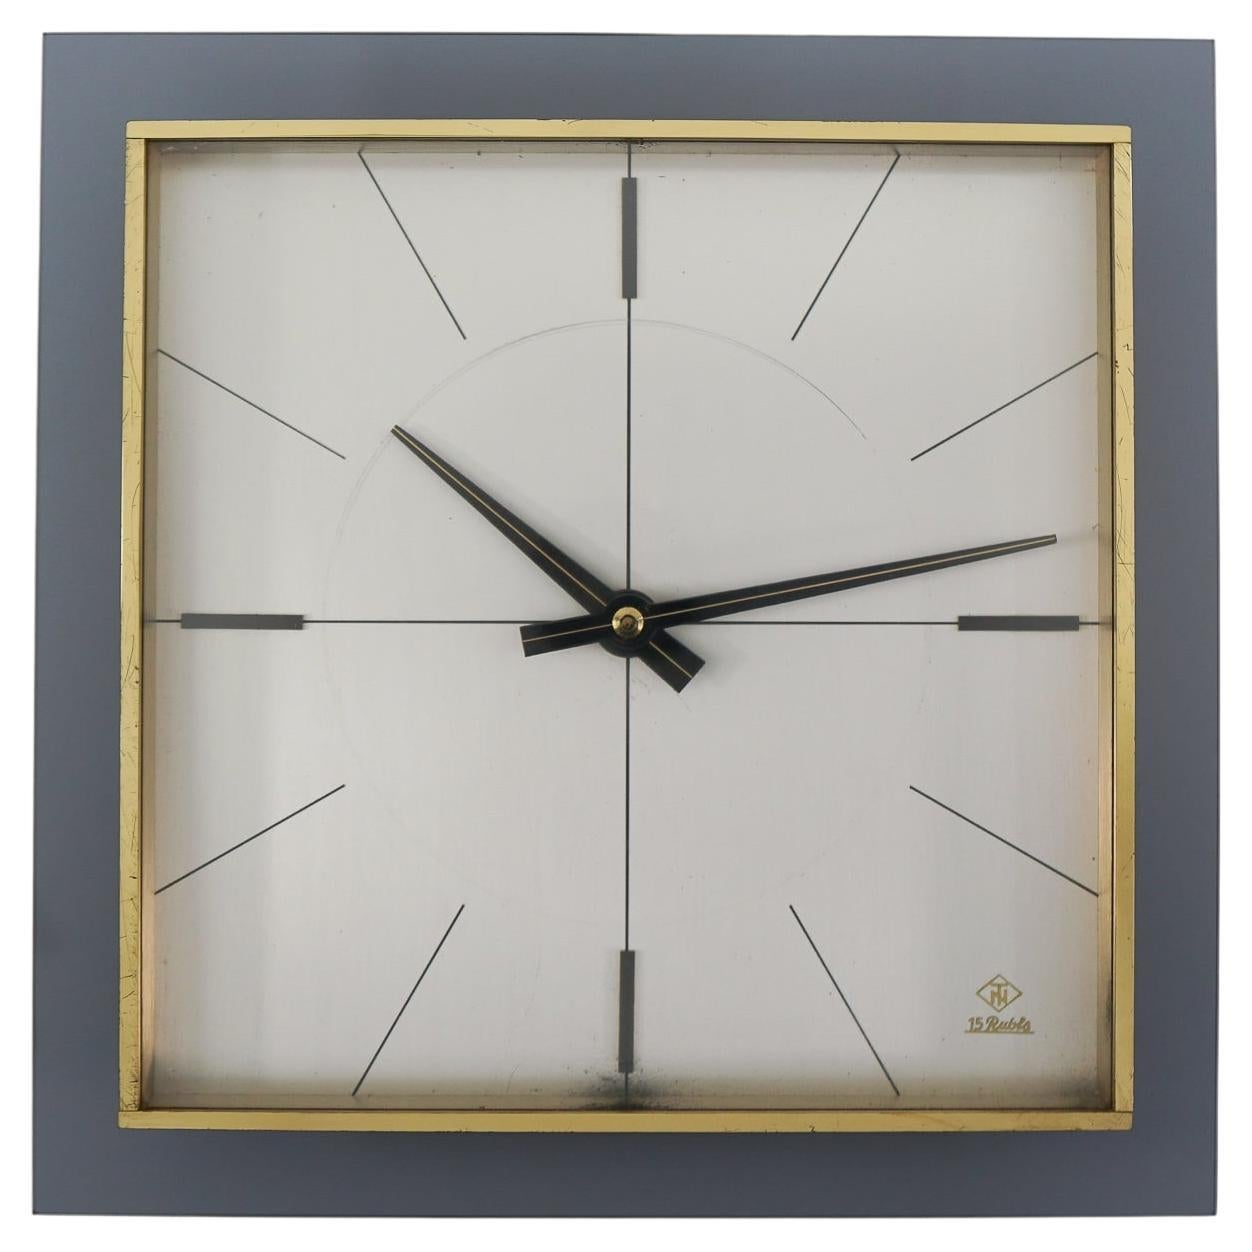 Lovely Mid-Century Modern Wall Clock by Telenorma TN in Brass and Acryl, 1960s For Sale